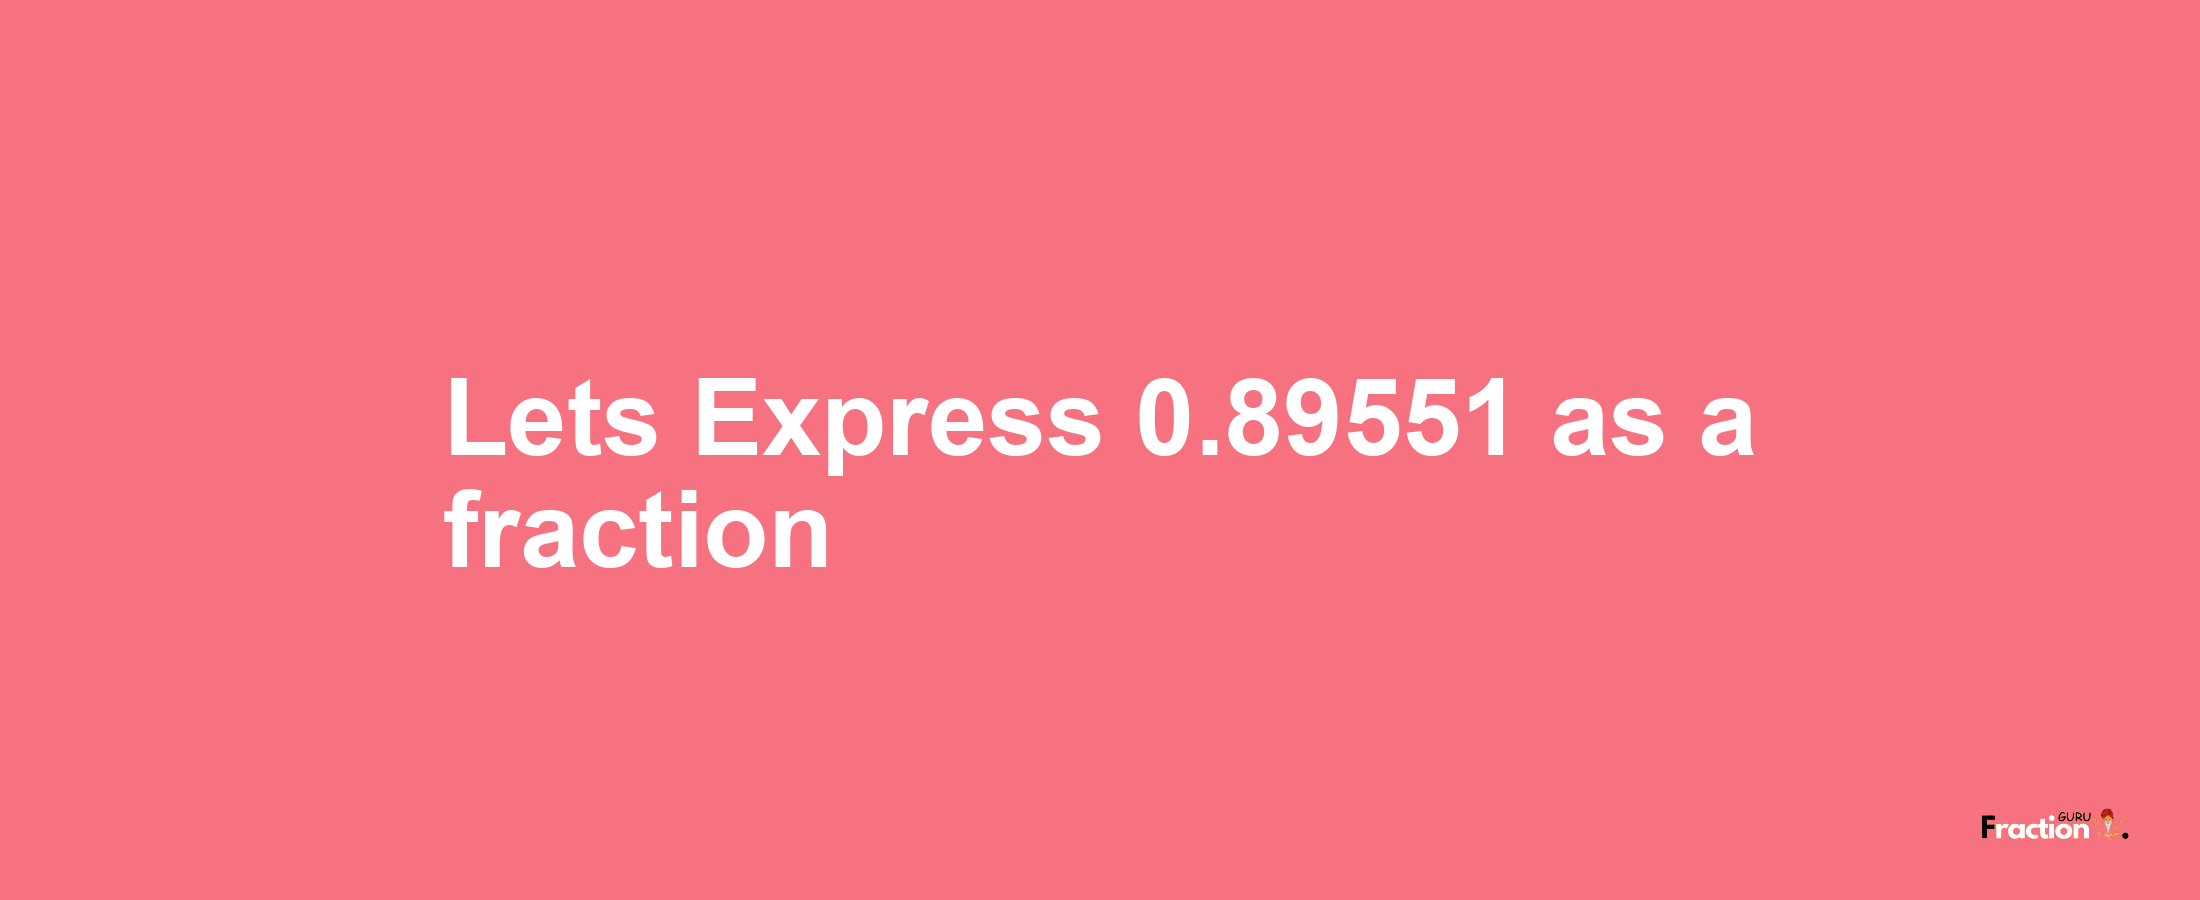 Lets Express 0.89551 as afraction